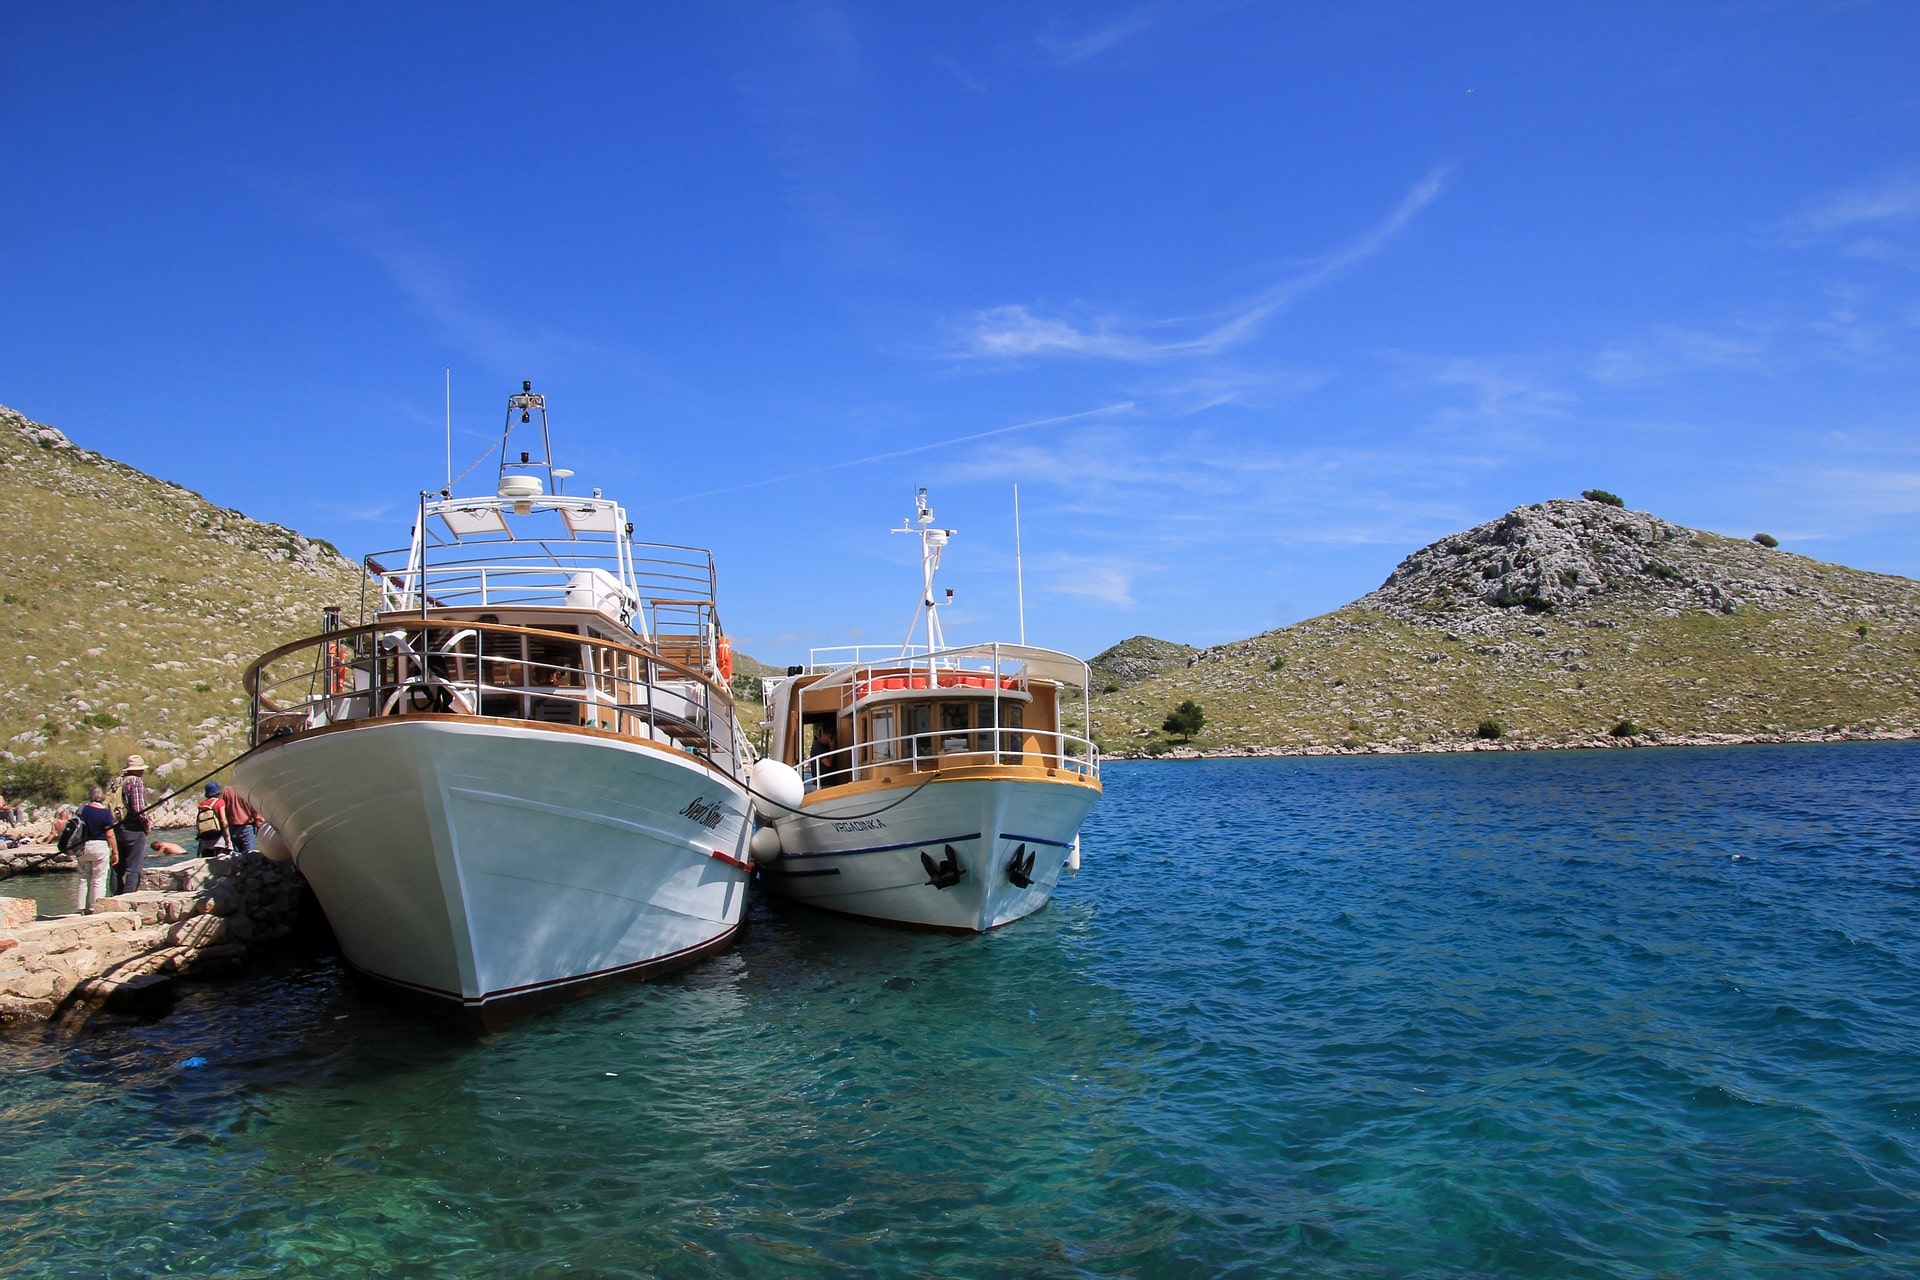 The Kornati Islands are some of the coolest places to visit in Croatia